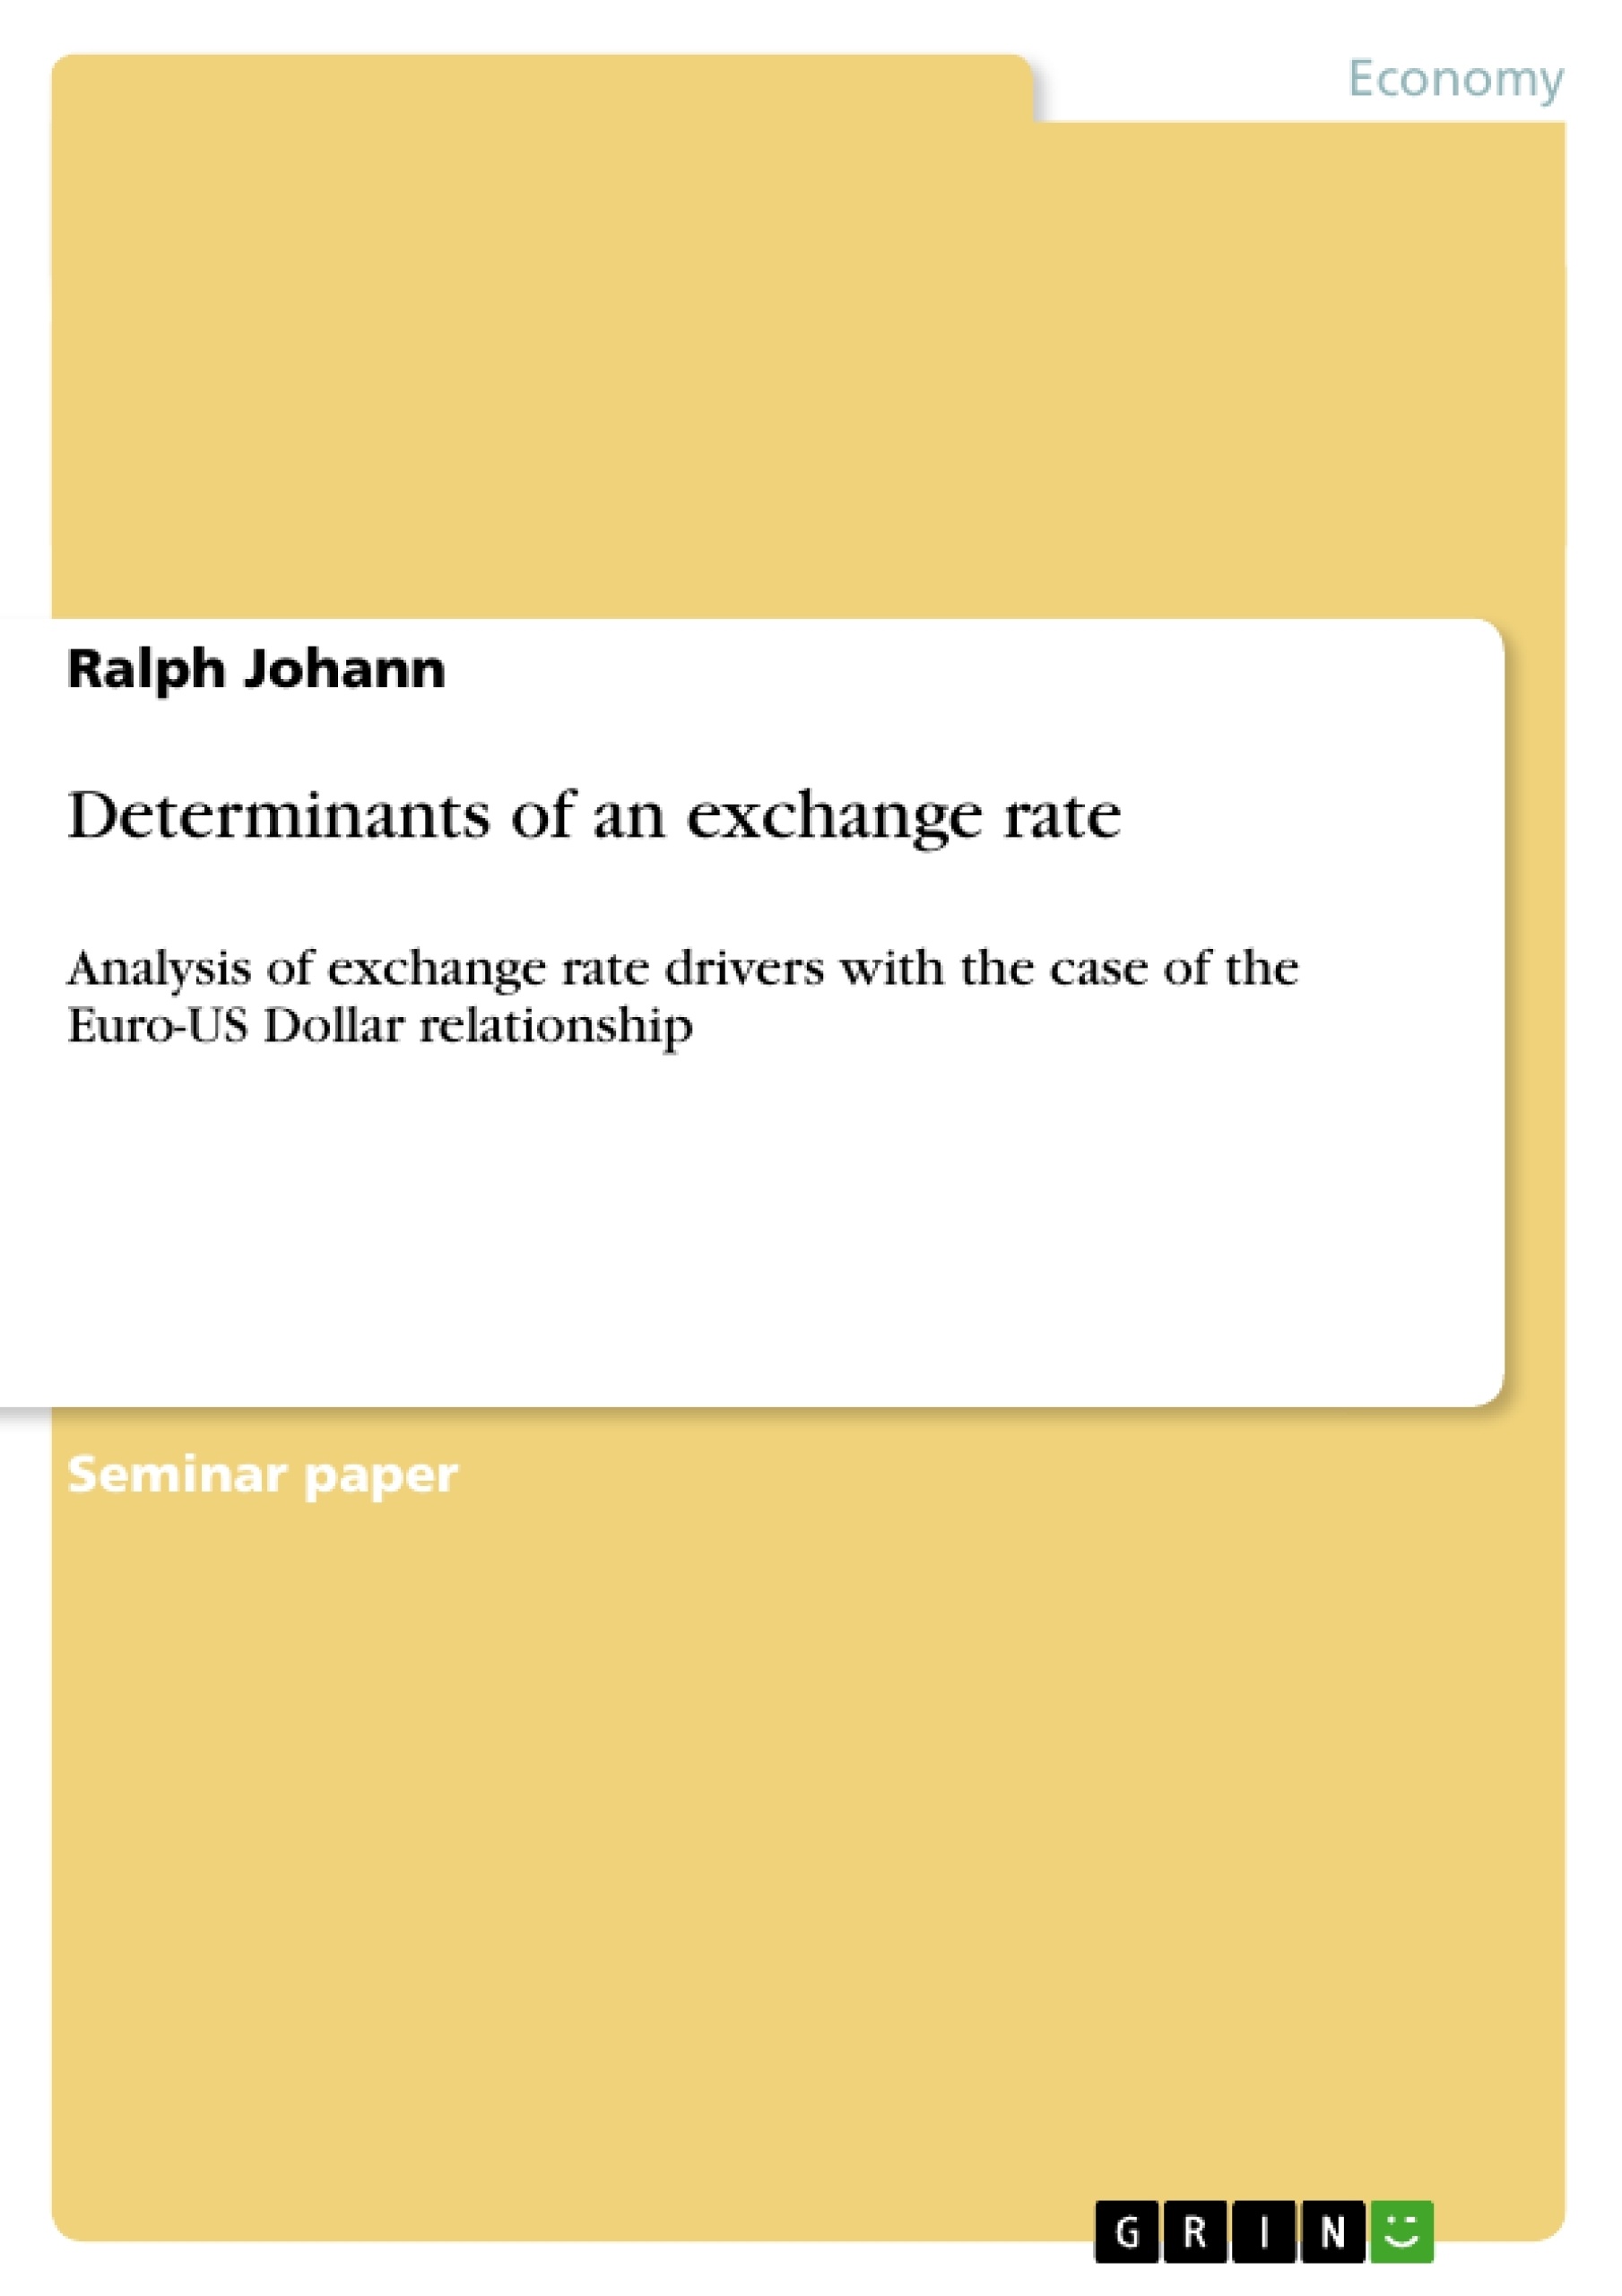 Foreign exchange market summary essay example